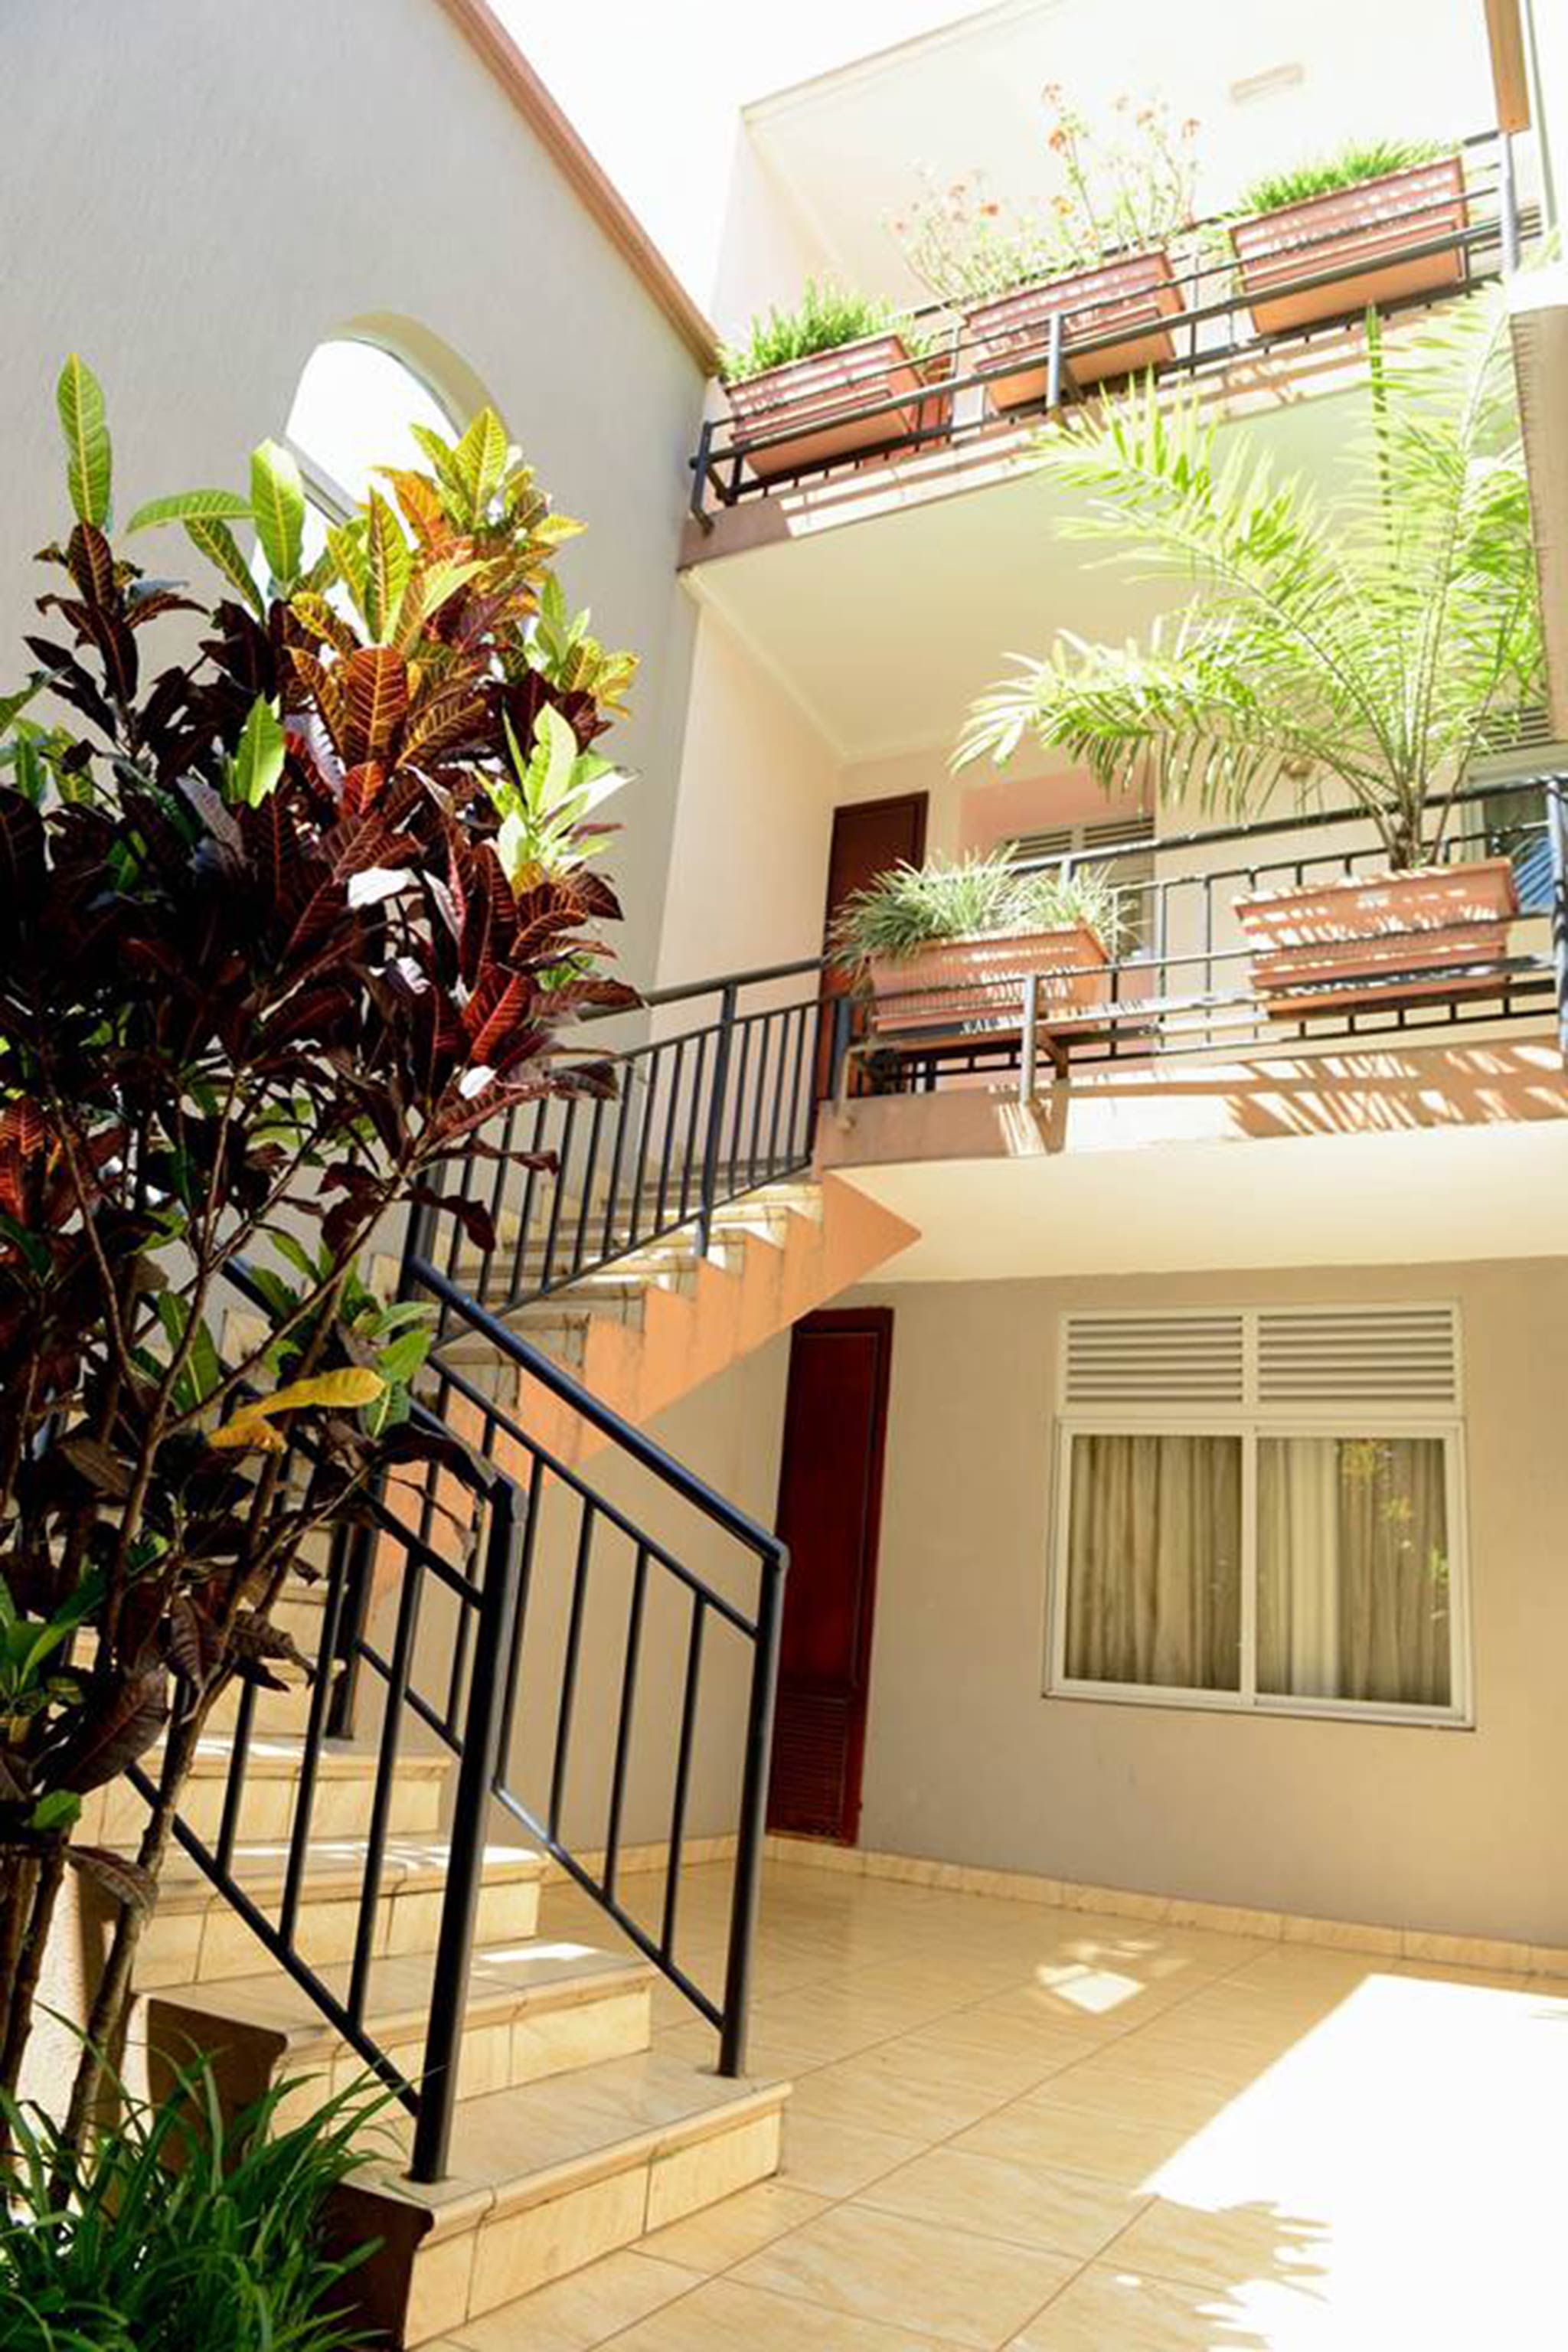 Enjoy You Vacation Wail Staying In This Single Room Fit For 2 People. - Kigali